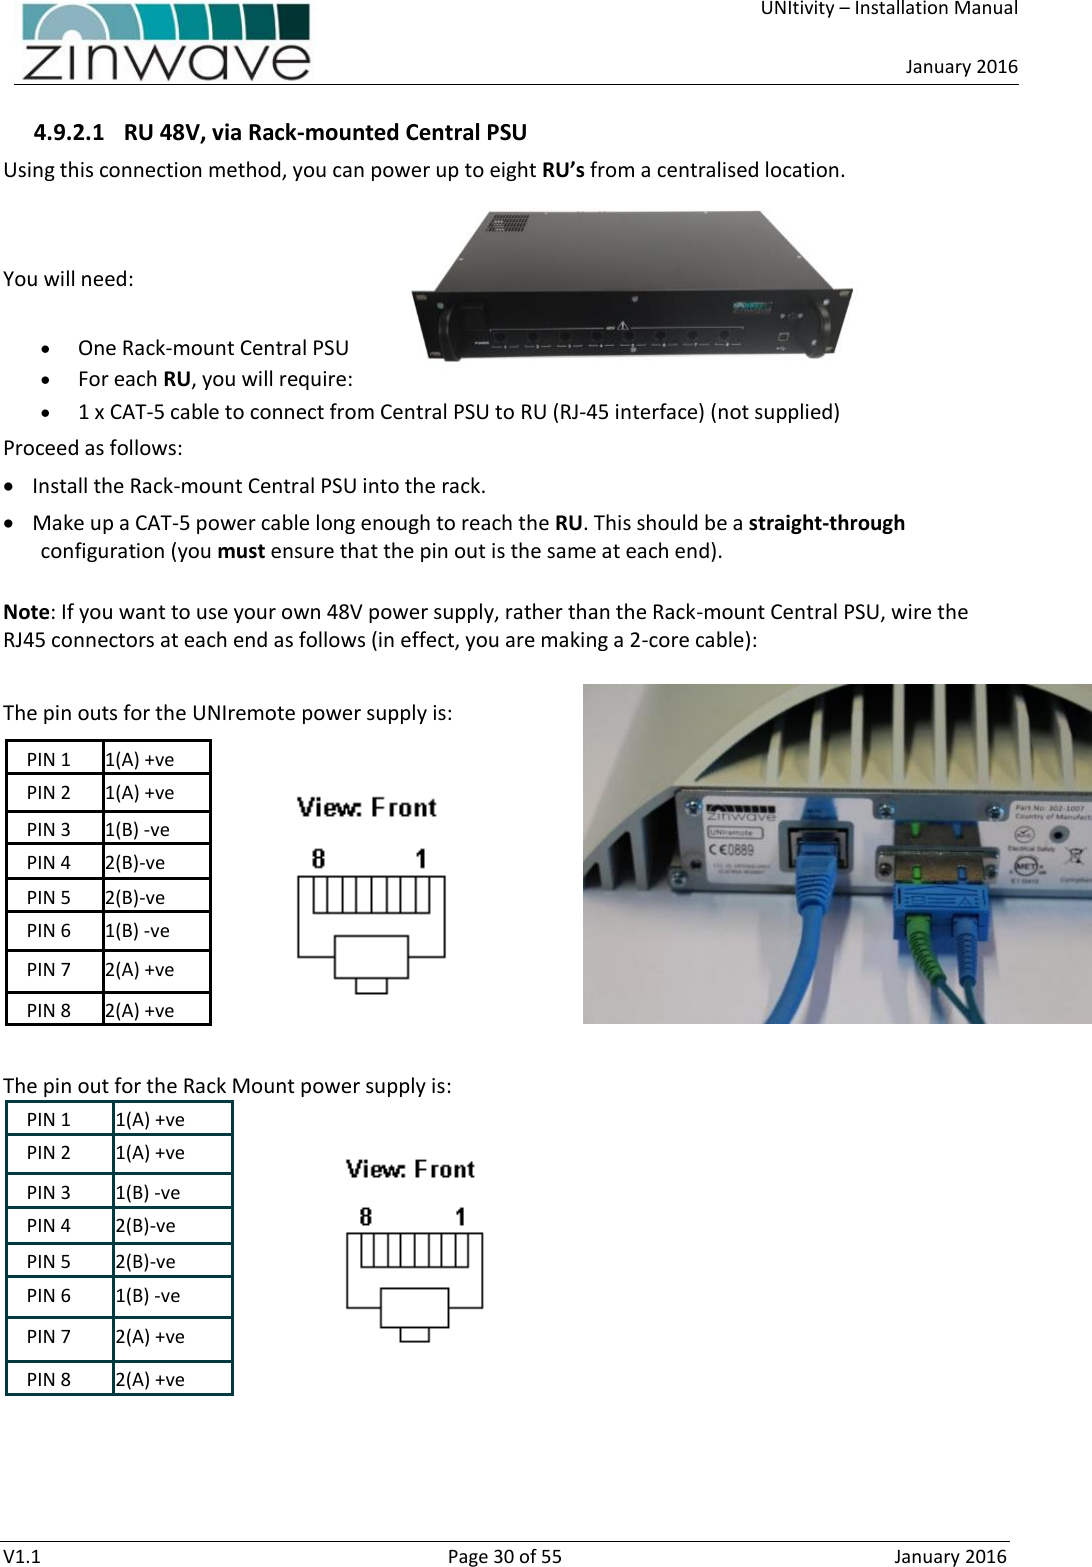     UNItivity – Installation Manual      January 2016  V1.1  Page 30 of 55  January 2016 4.9.2.1 RU 48V, via Rack-mounted Central PSU Using this connection method, you can power up to eight RU’s from a centralised location.    You will need:   One Rack-mount Central PSU  For each RU, you will require:  1 x CAT-5 cable to connect from Central PSU to RU (RJ-45 interface) (not supplied) Proceed as follows:  Install the Rack-mount Central PSU into the rack.  Make up a CAT-5 power cable long enough to reach the RU. This should be a straight-through configuration (you must ensure that the pin out is the same at each end).    Note: If you want to use your own 48V power supply, rather than the Rack-mount Central PSU, wire the RJ45 connectors at each end as follows (in effect, you are making a 2-core cable):  The pin outs for the UNIremote power supply is: PIN 1 1(A) +ve PIN 2 1(A) +ve PIN 3 1(B) -ve PIN 4 2(B)-ve PIN 5 2(B)-ve PIN 6 1(B) -ve PIN 7 2(A) +ve PIN 8 2(A) +ve  The pin out for the Rack Mount power supply is: PIN 1 1(A) +ve PIN 2 1(A) +ve PIN 3 1(B) -ve PIN 4 2(B)-ve PIN 5 2(B)-ve PIN 6 1(B) -ve PIN 7 2(A) +ve PIN 8 2(A) +ve    